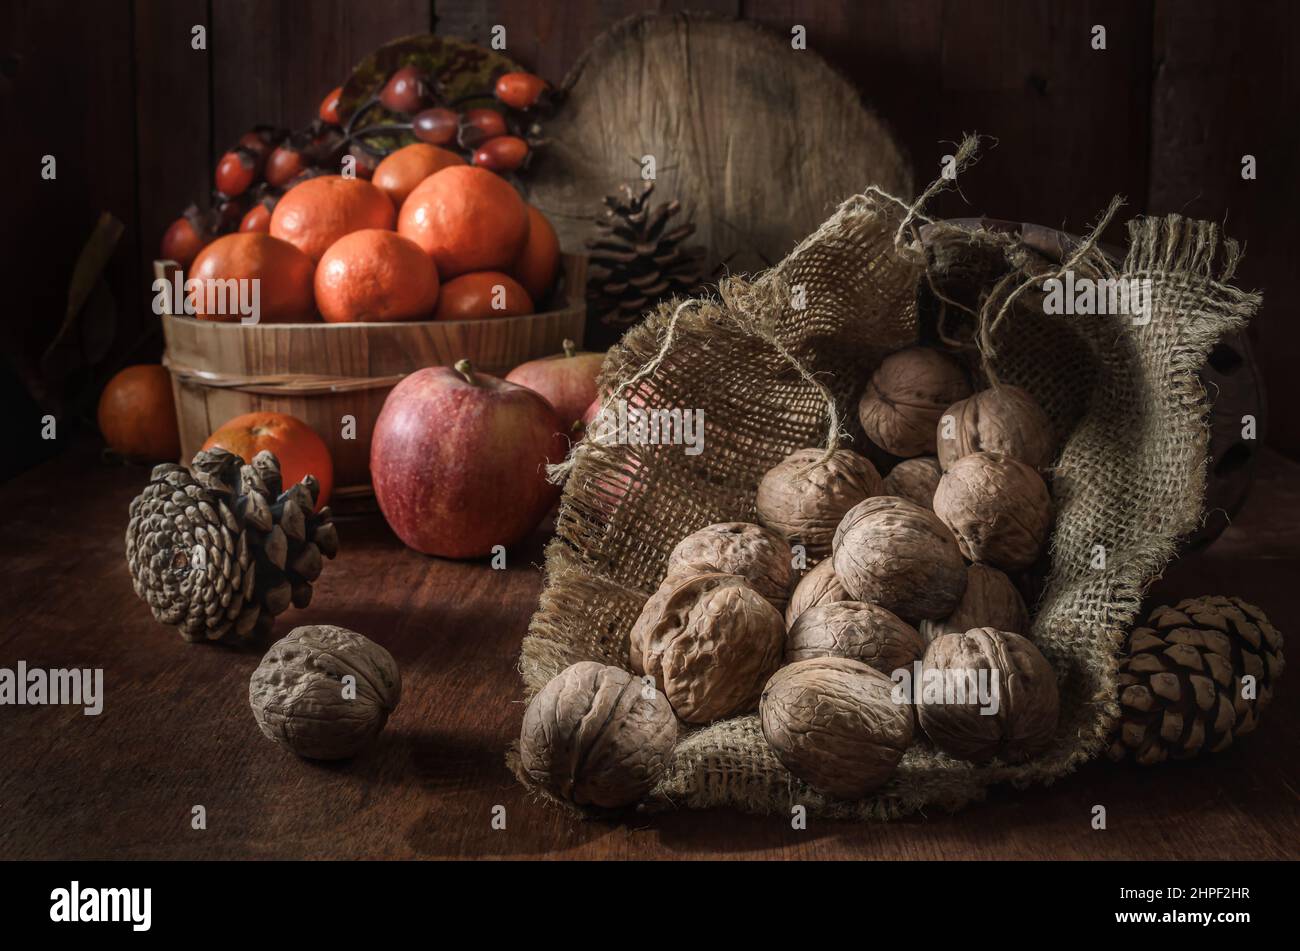 walnuts and other fruits on a dark wooden background Stock Photo